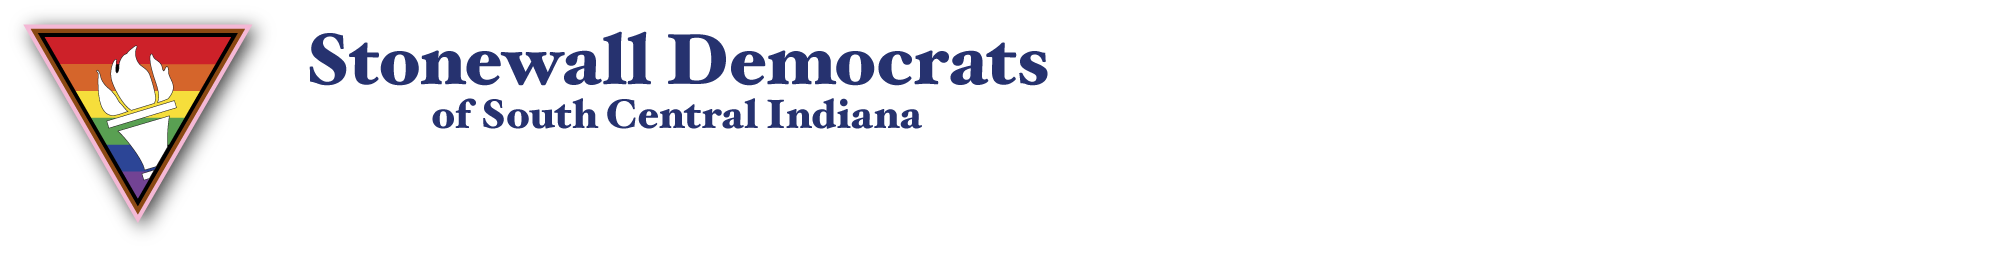 Stonewall Democrats of South Central Indiana